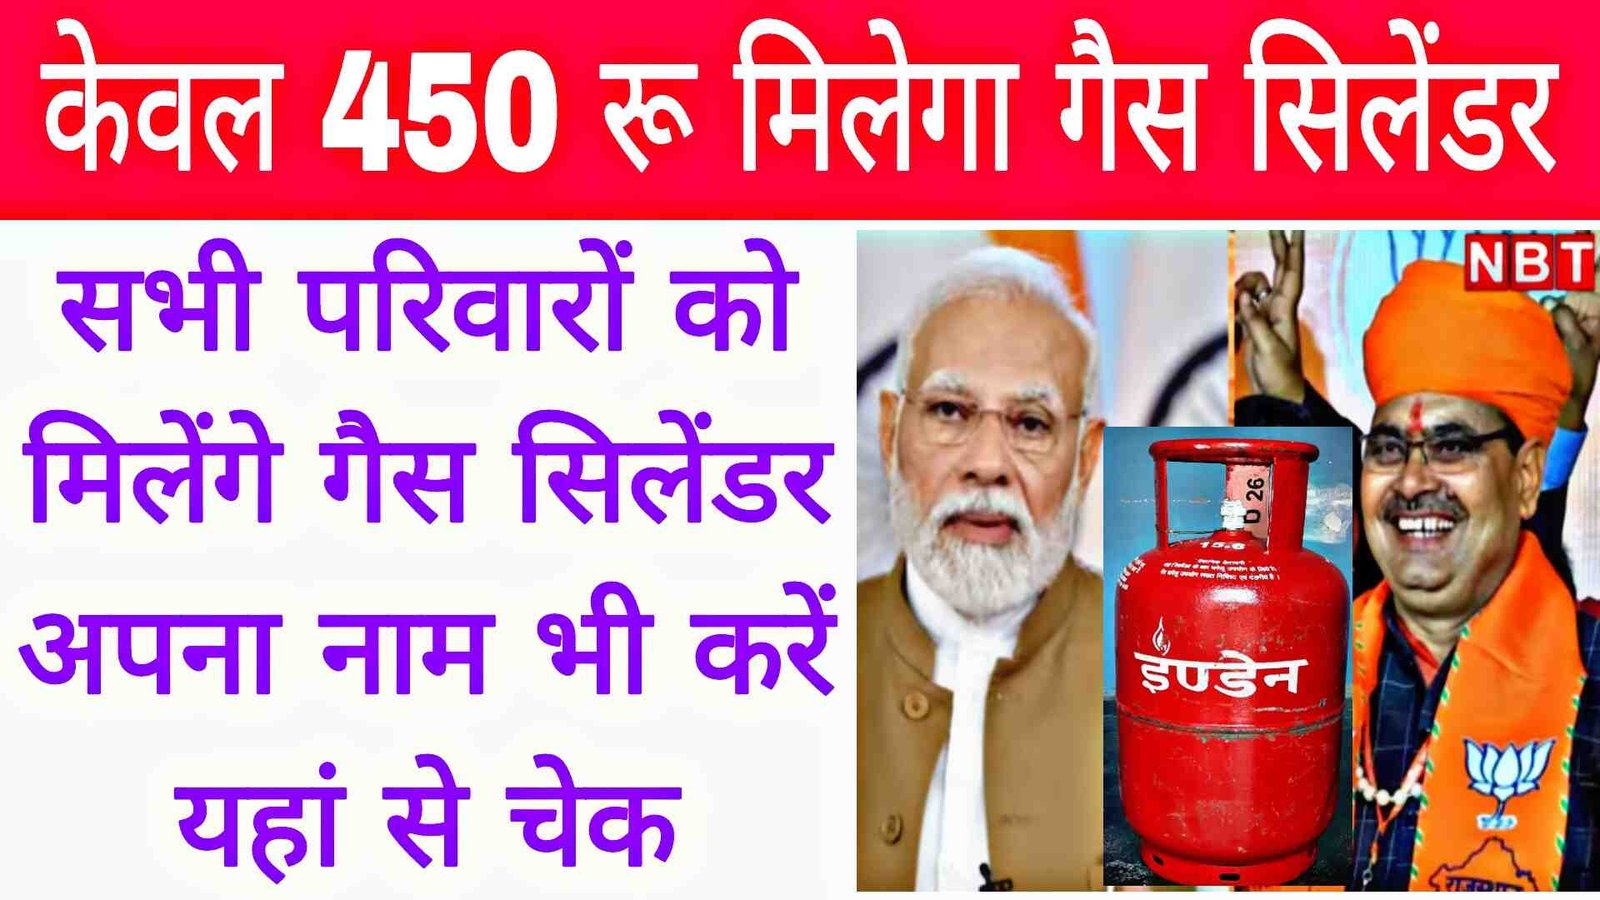 LPG Gas Cylinder 450 Rupees